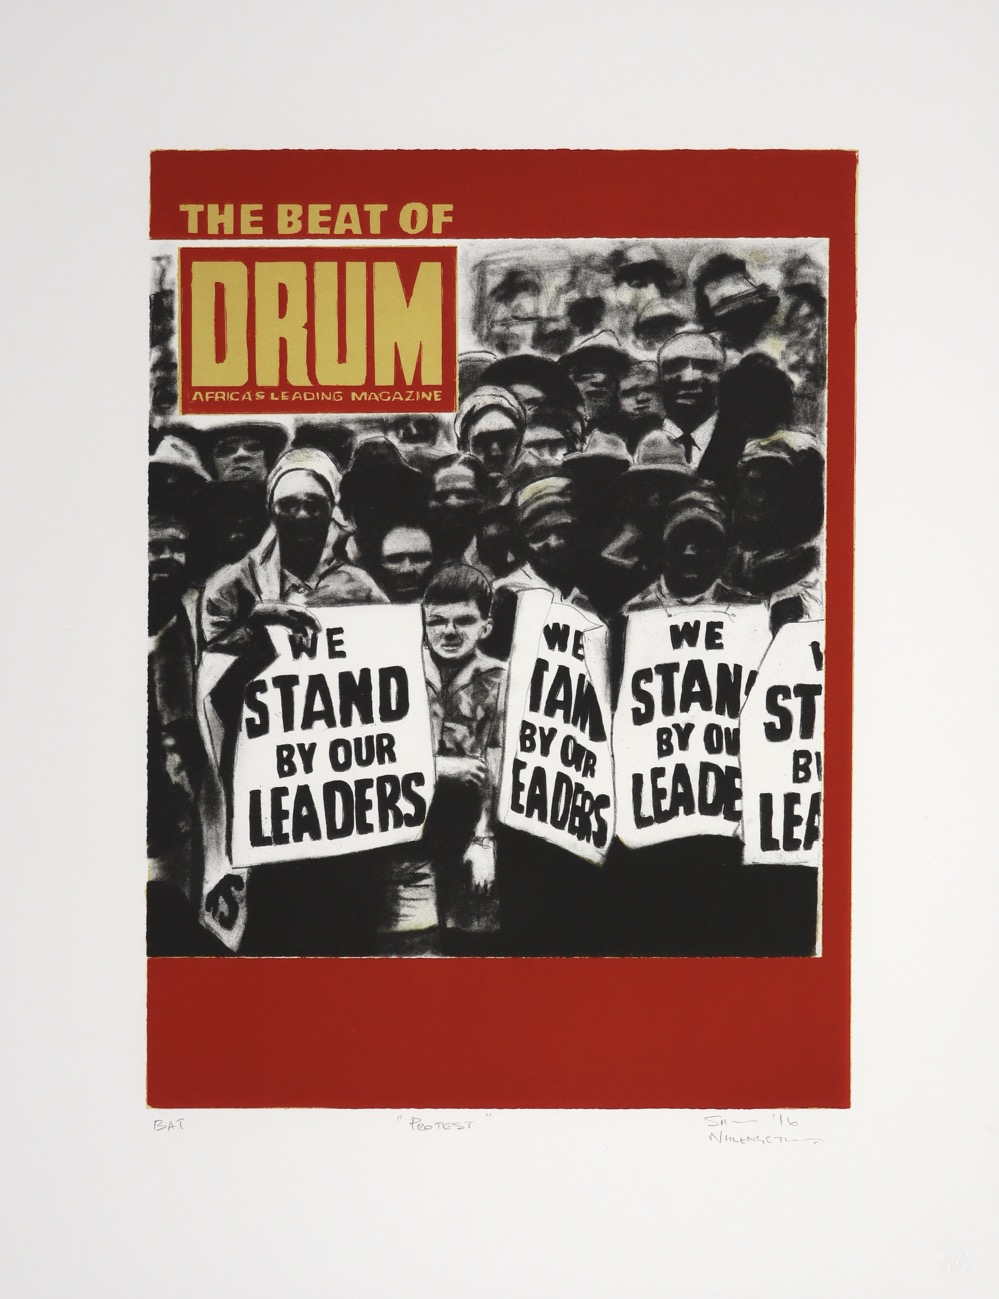 Litho of Drum magazine cover with protesting crowd holding placards on it.